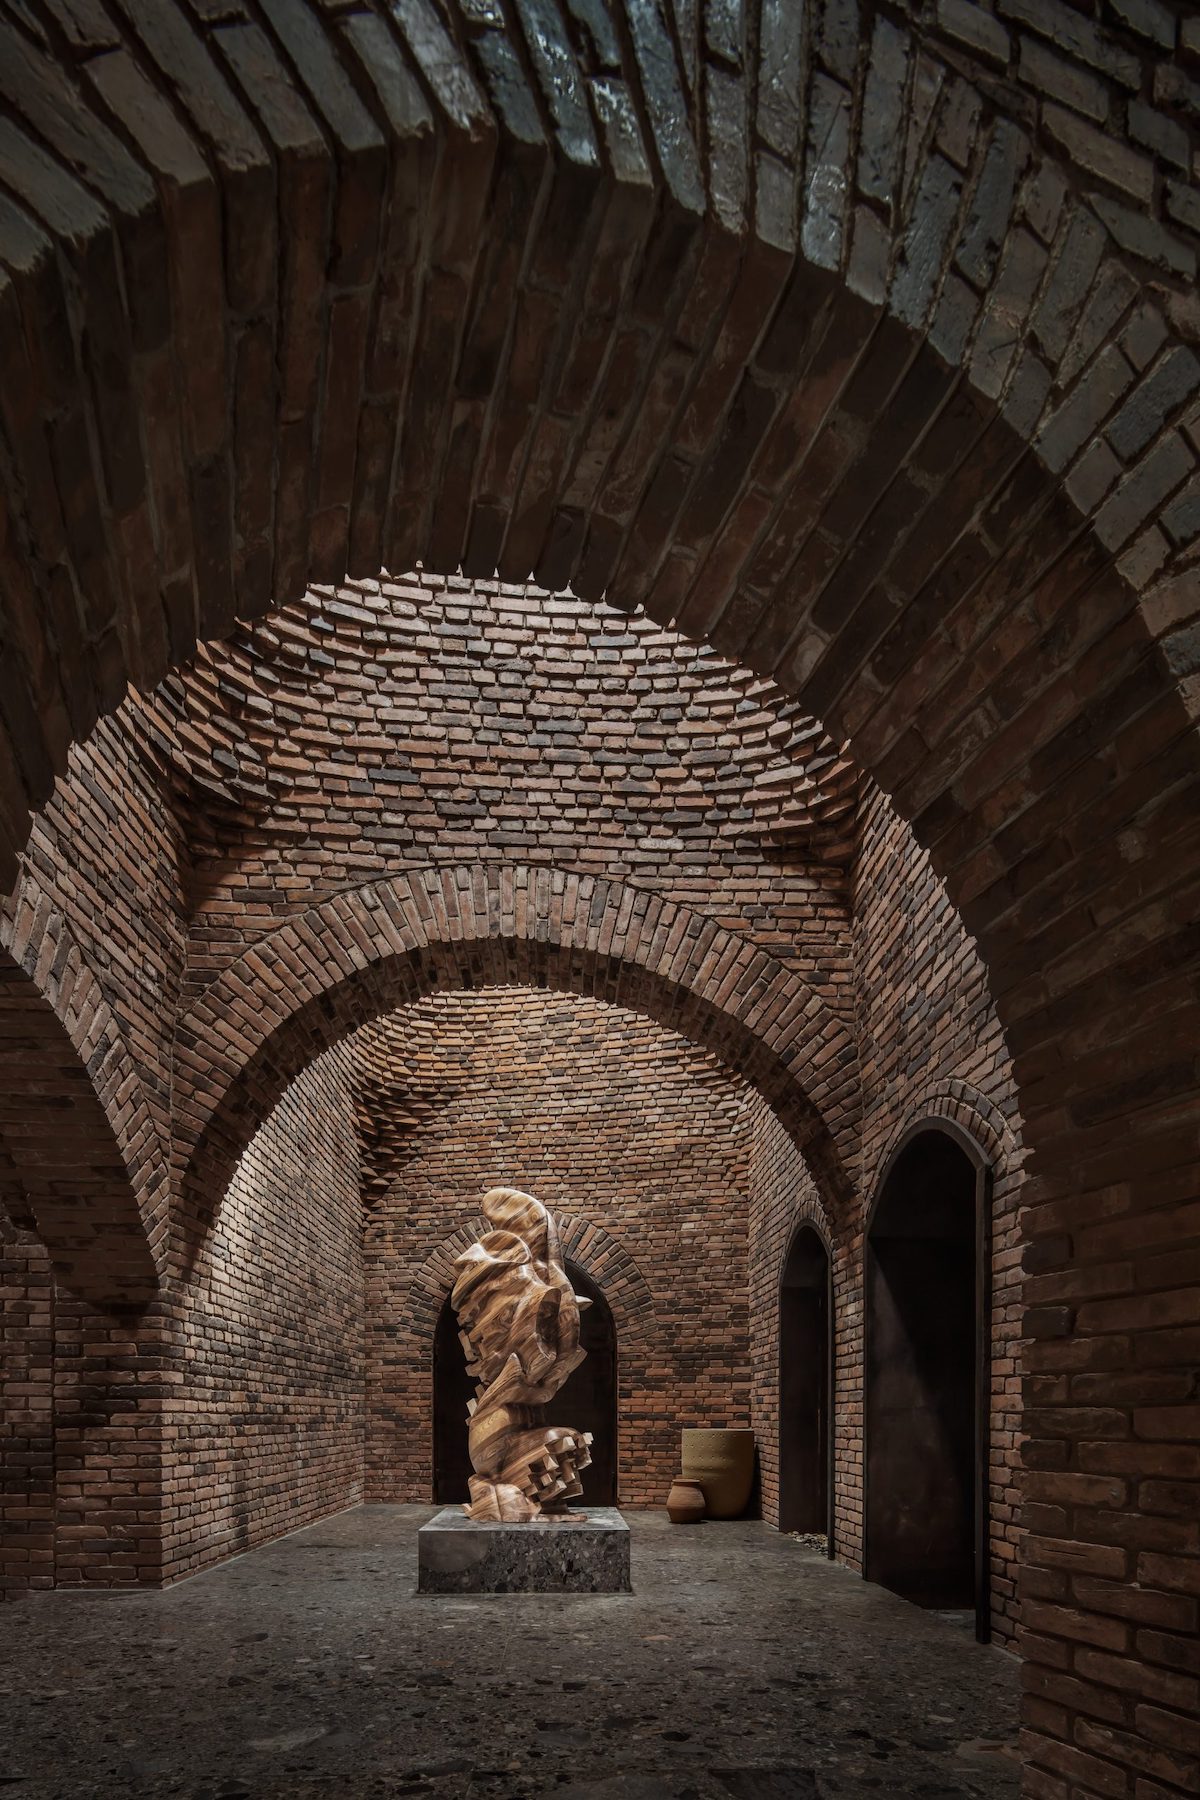 Brick Interior With Abstract Sculpture in the Middle